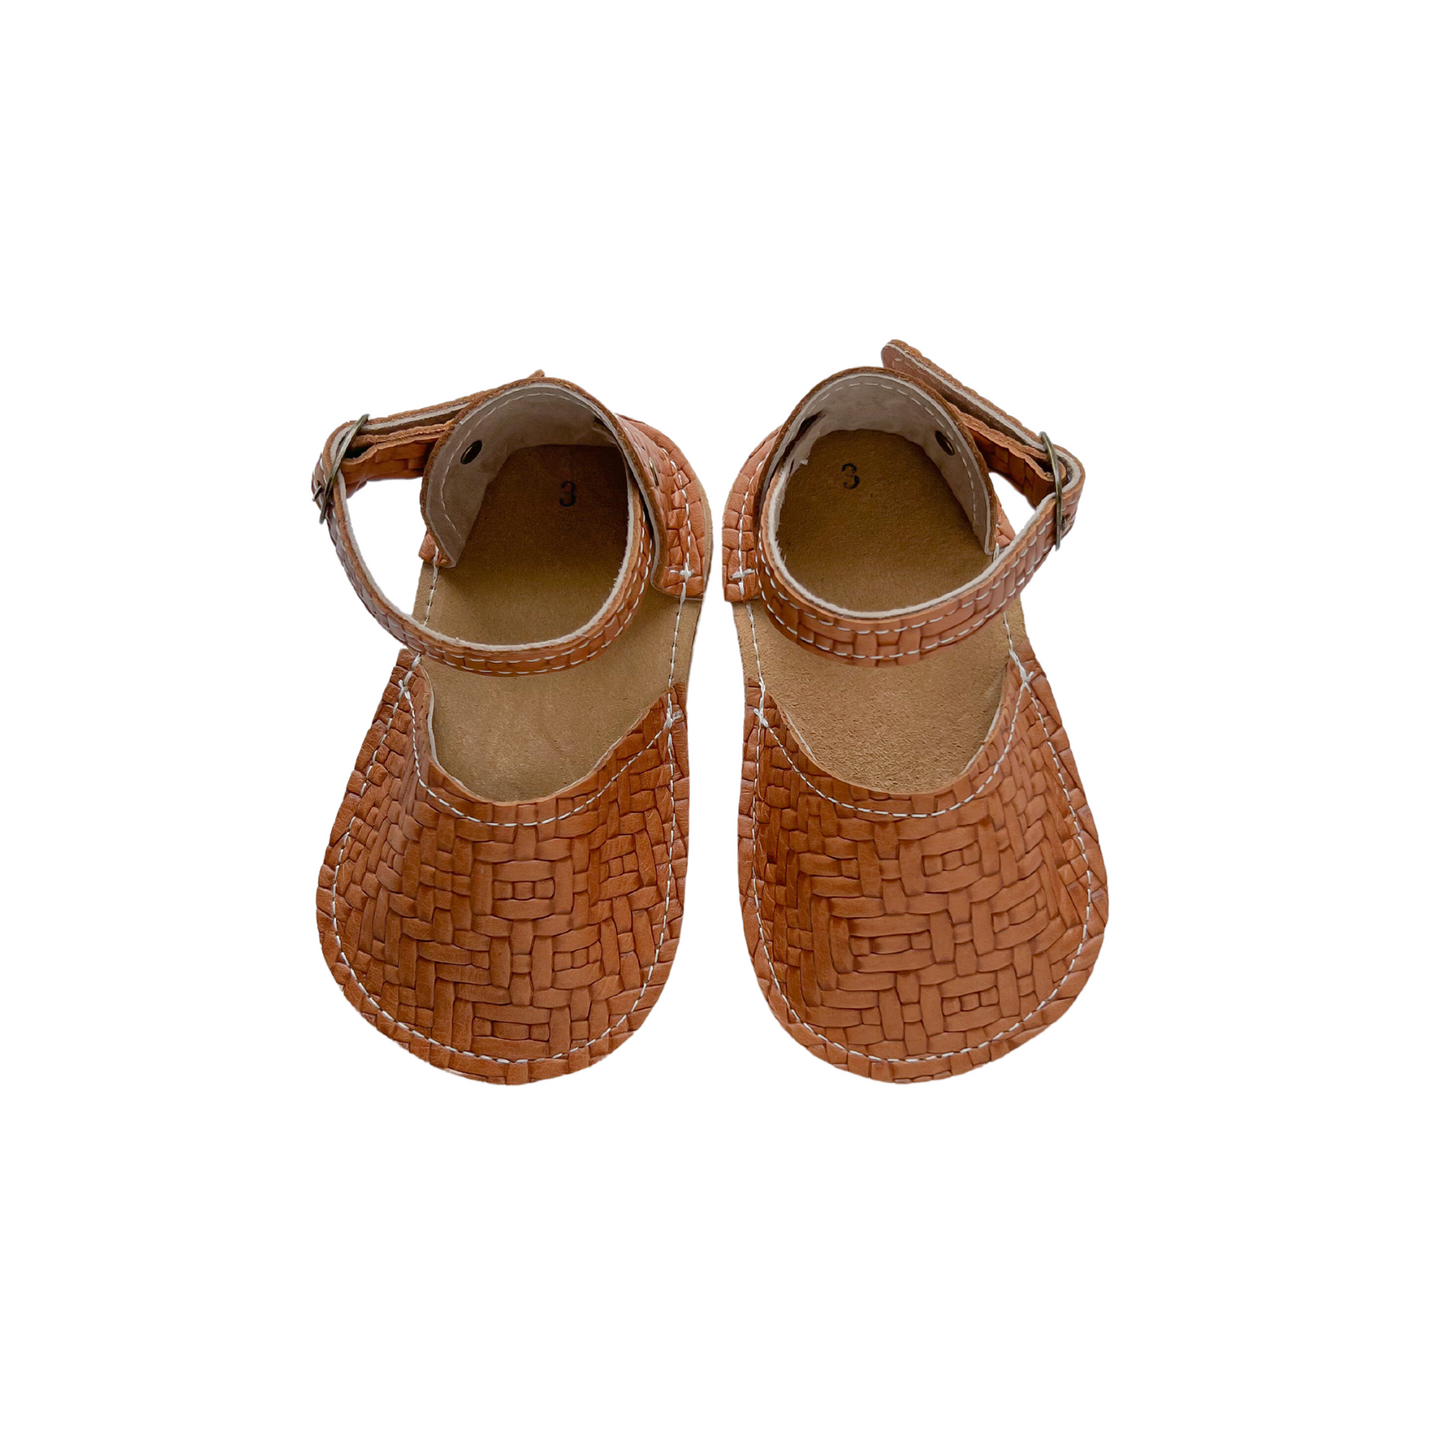 Load image into Gallery viewer, Little Explorer Sandals - Saddle Weave
